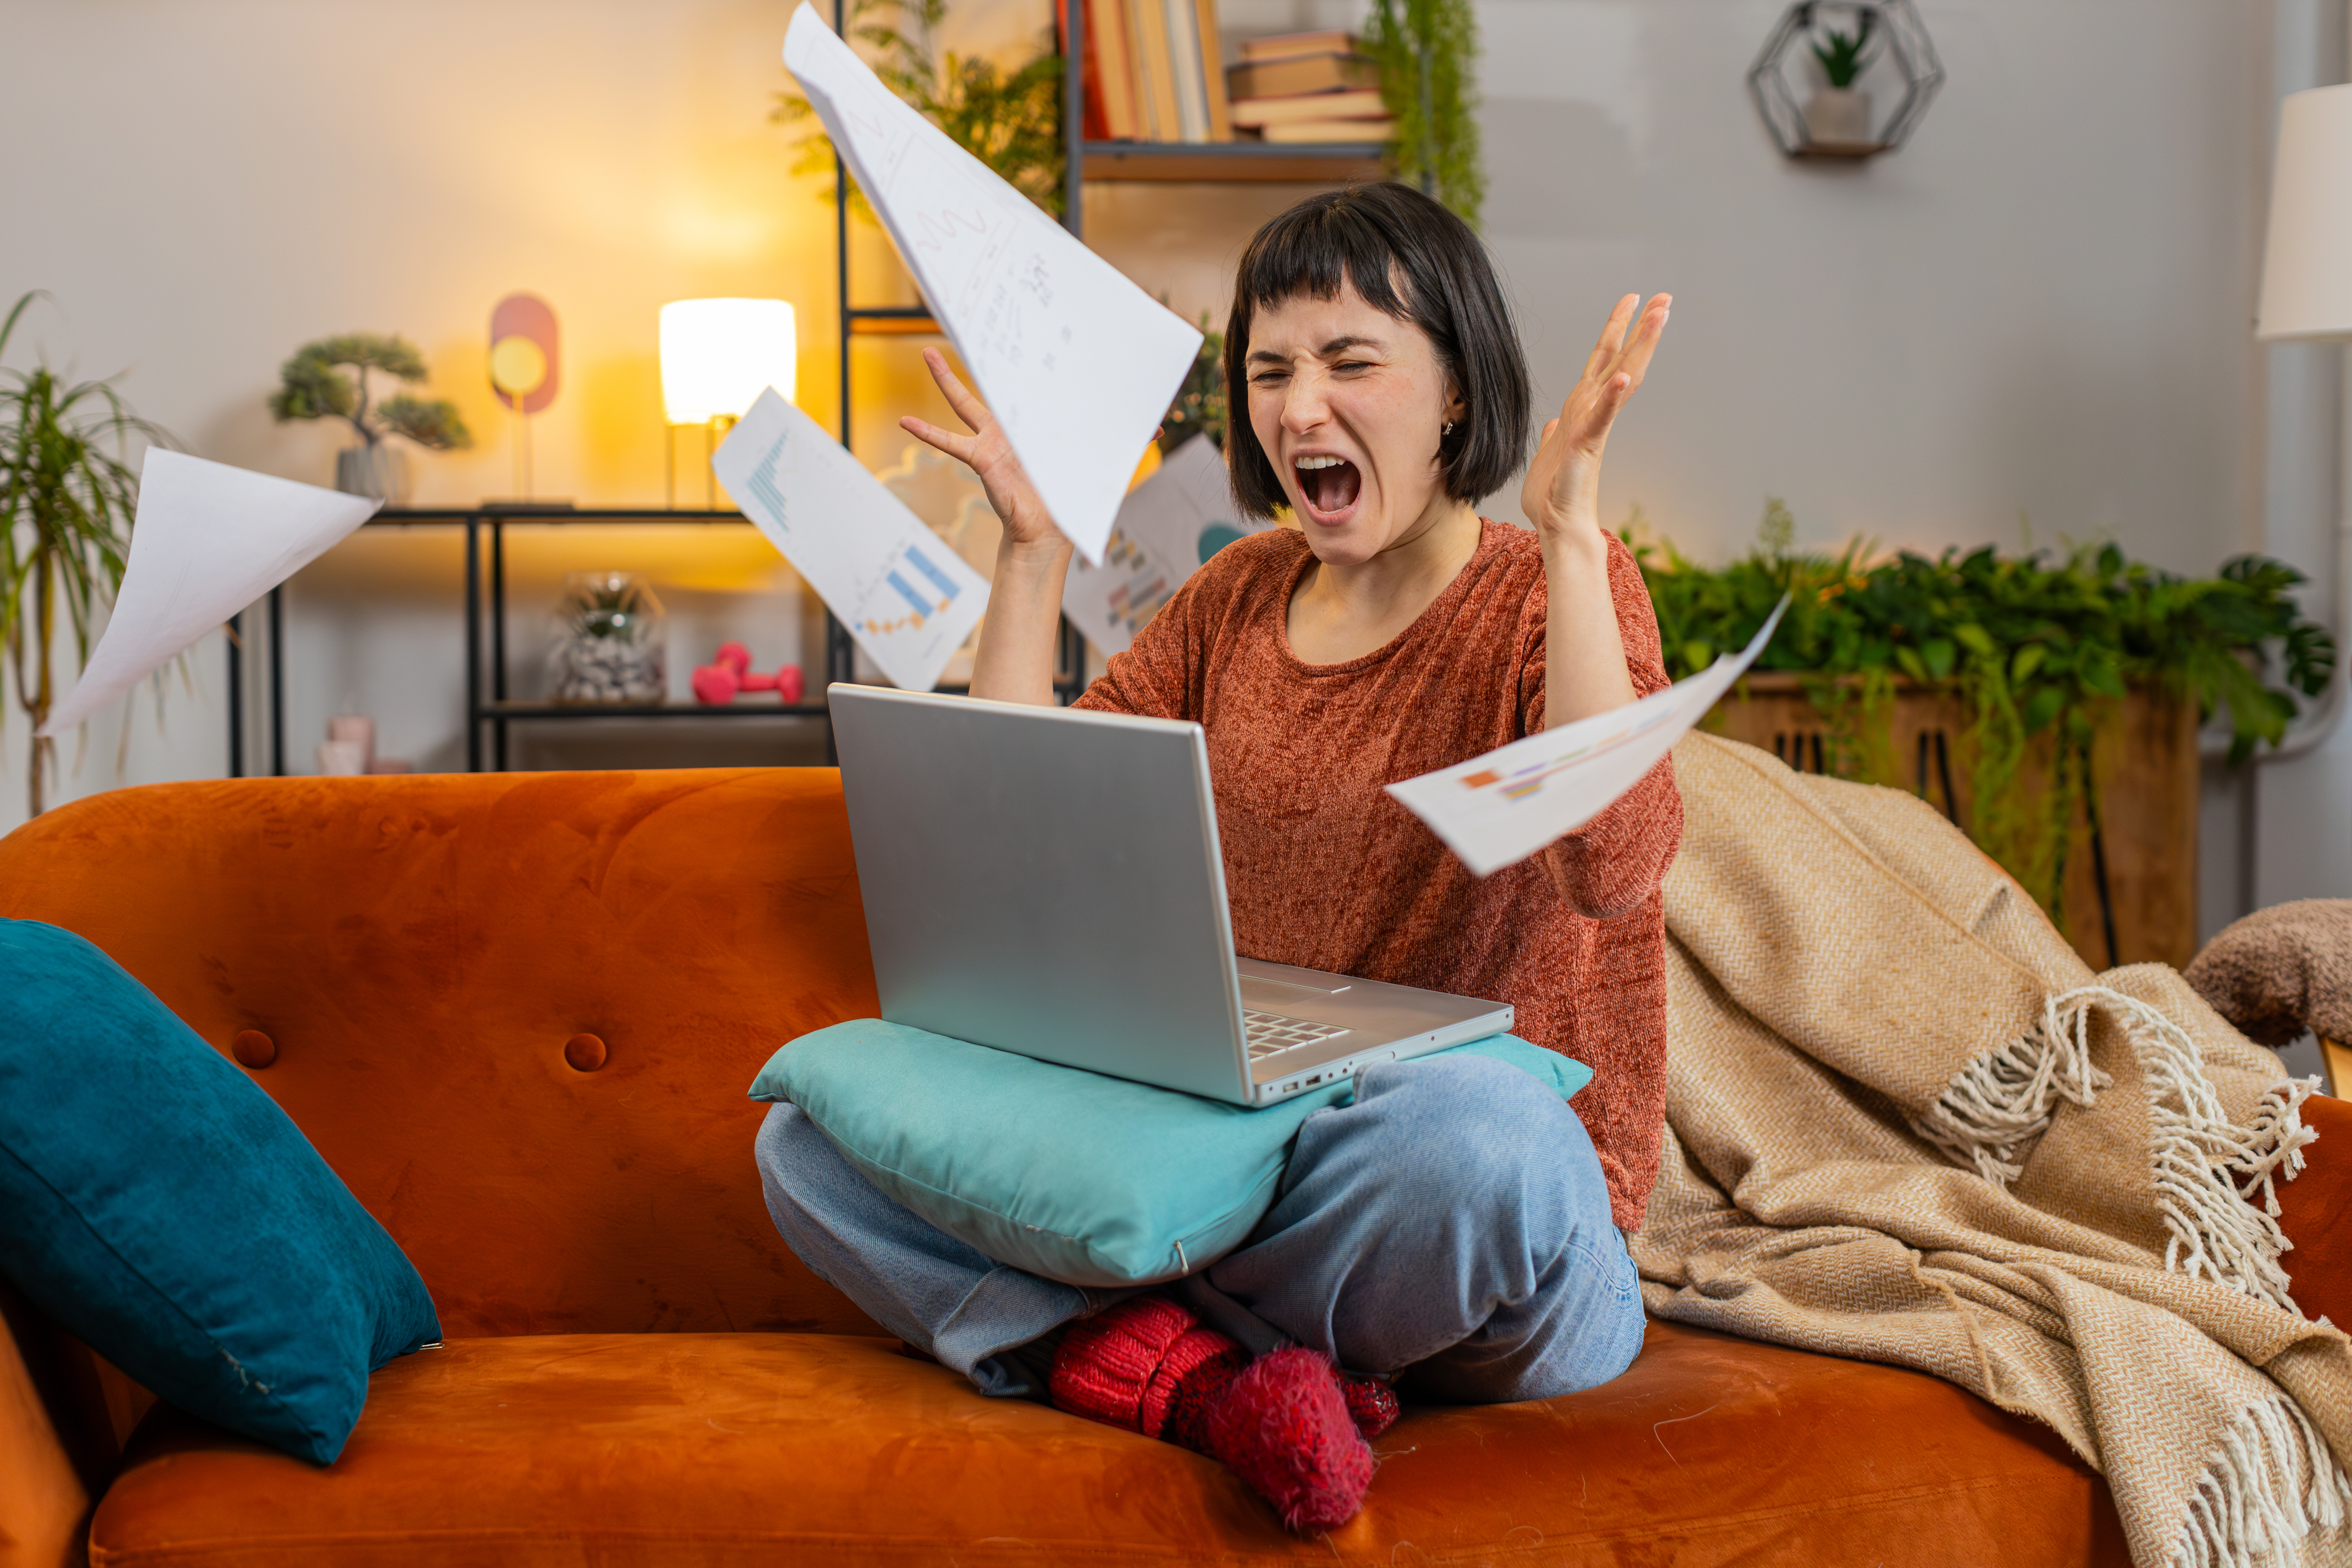 Woman sitting cross-legged on sofa with laptop, papers flying around, expressing frustration or excitement